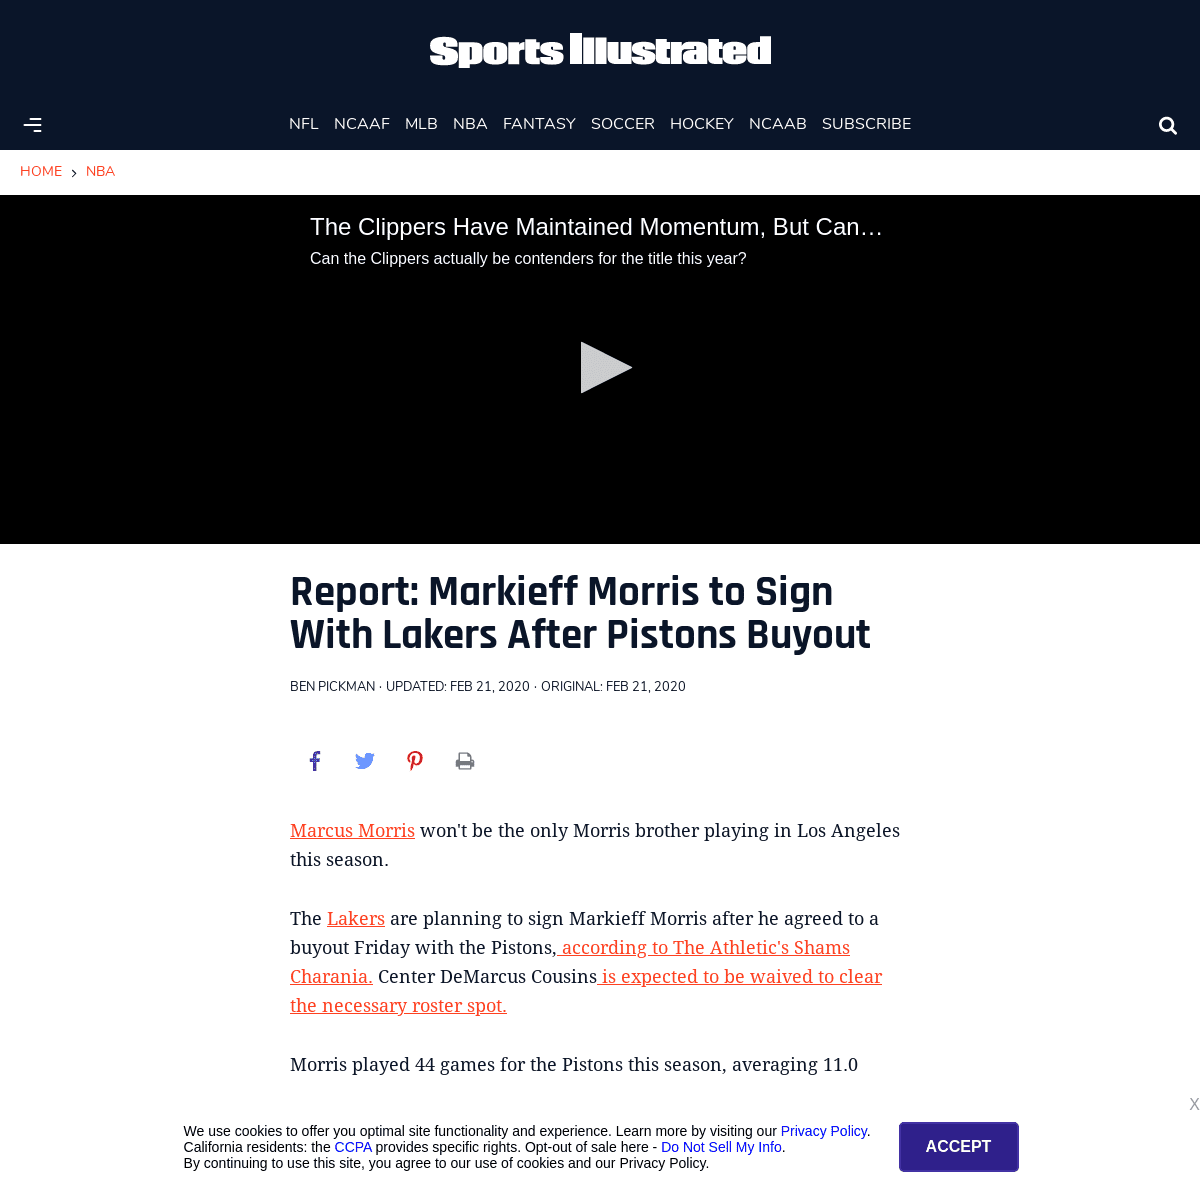 A complete backup of www.si.com/nba/2020/02/21/markieff-morris-lakers-sign-pistons-buyout